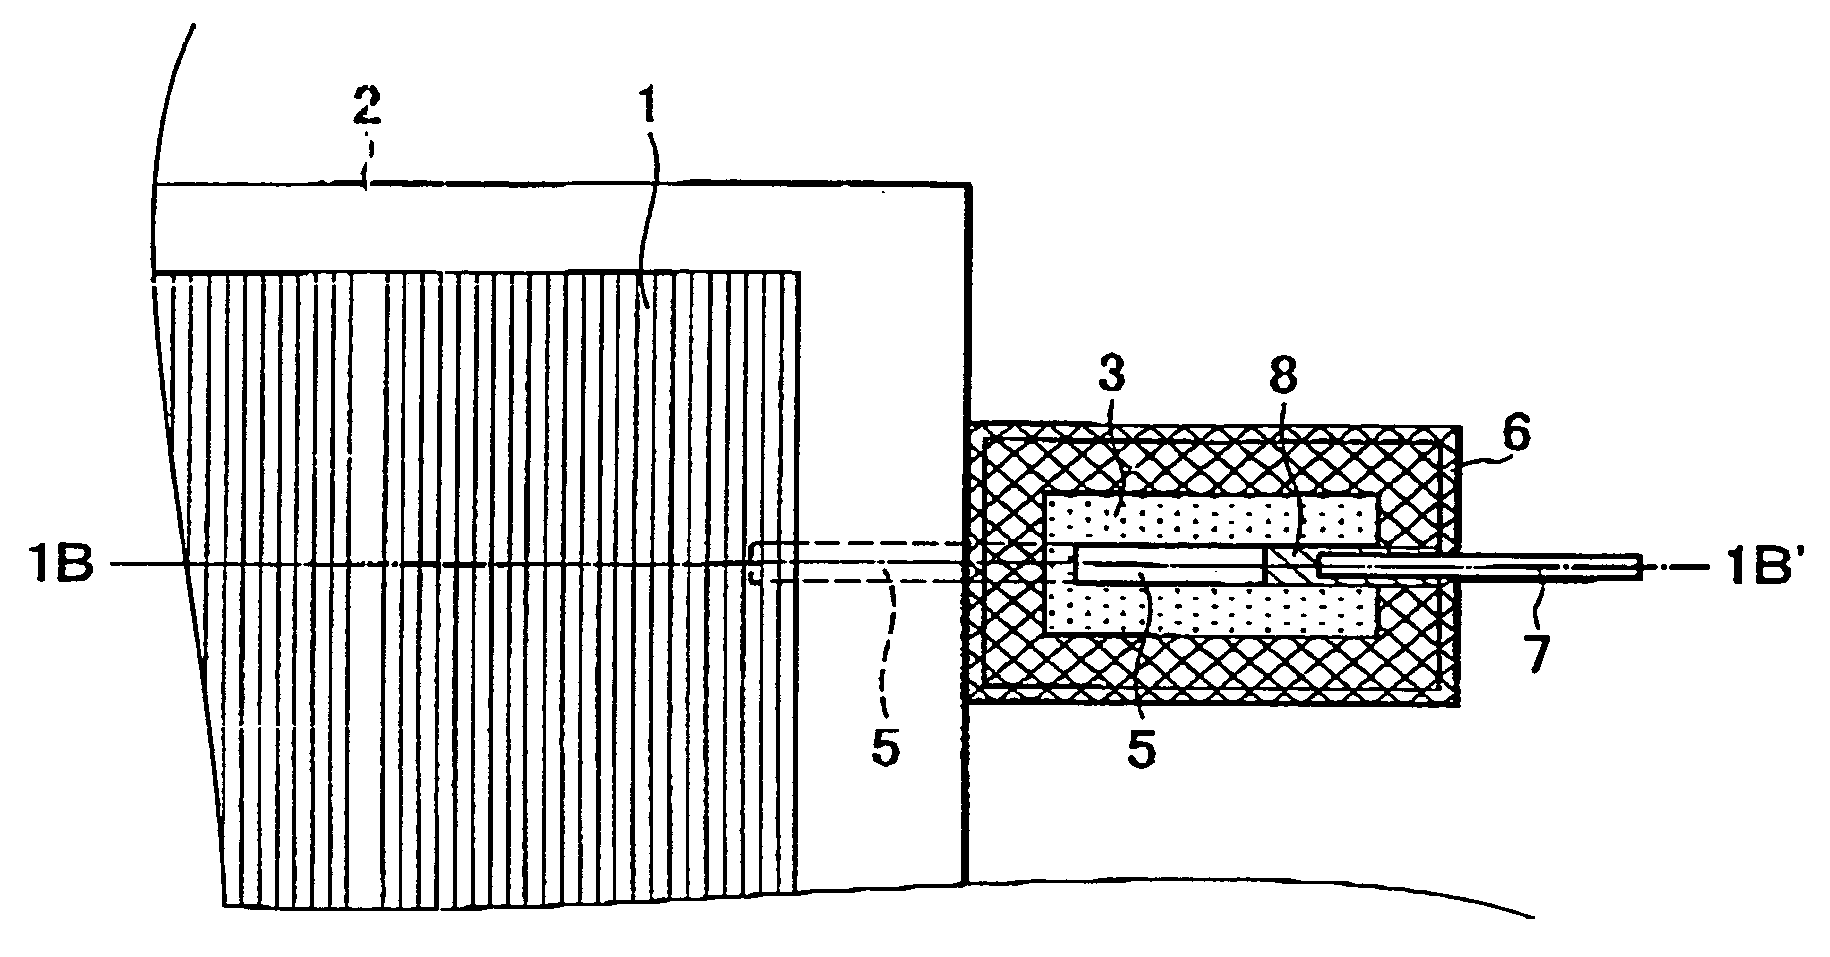 Solar cell module having an electric device